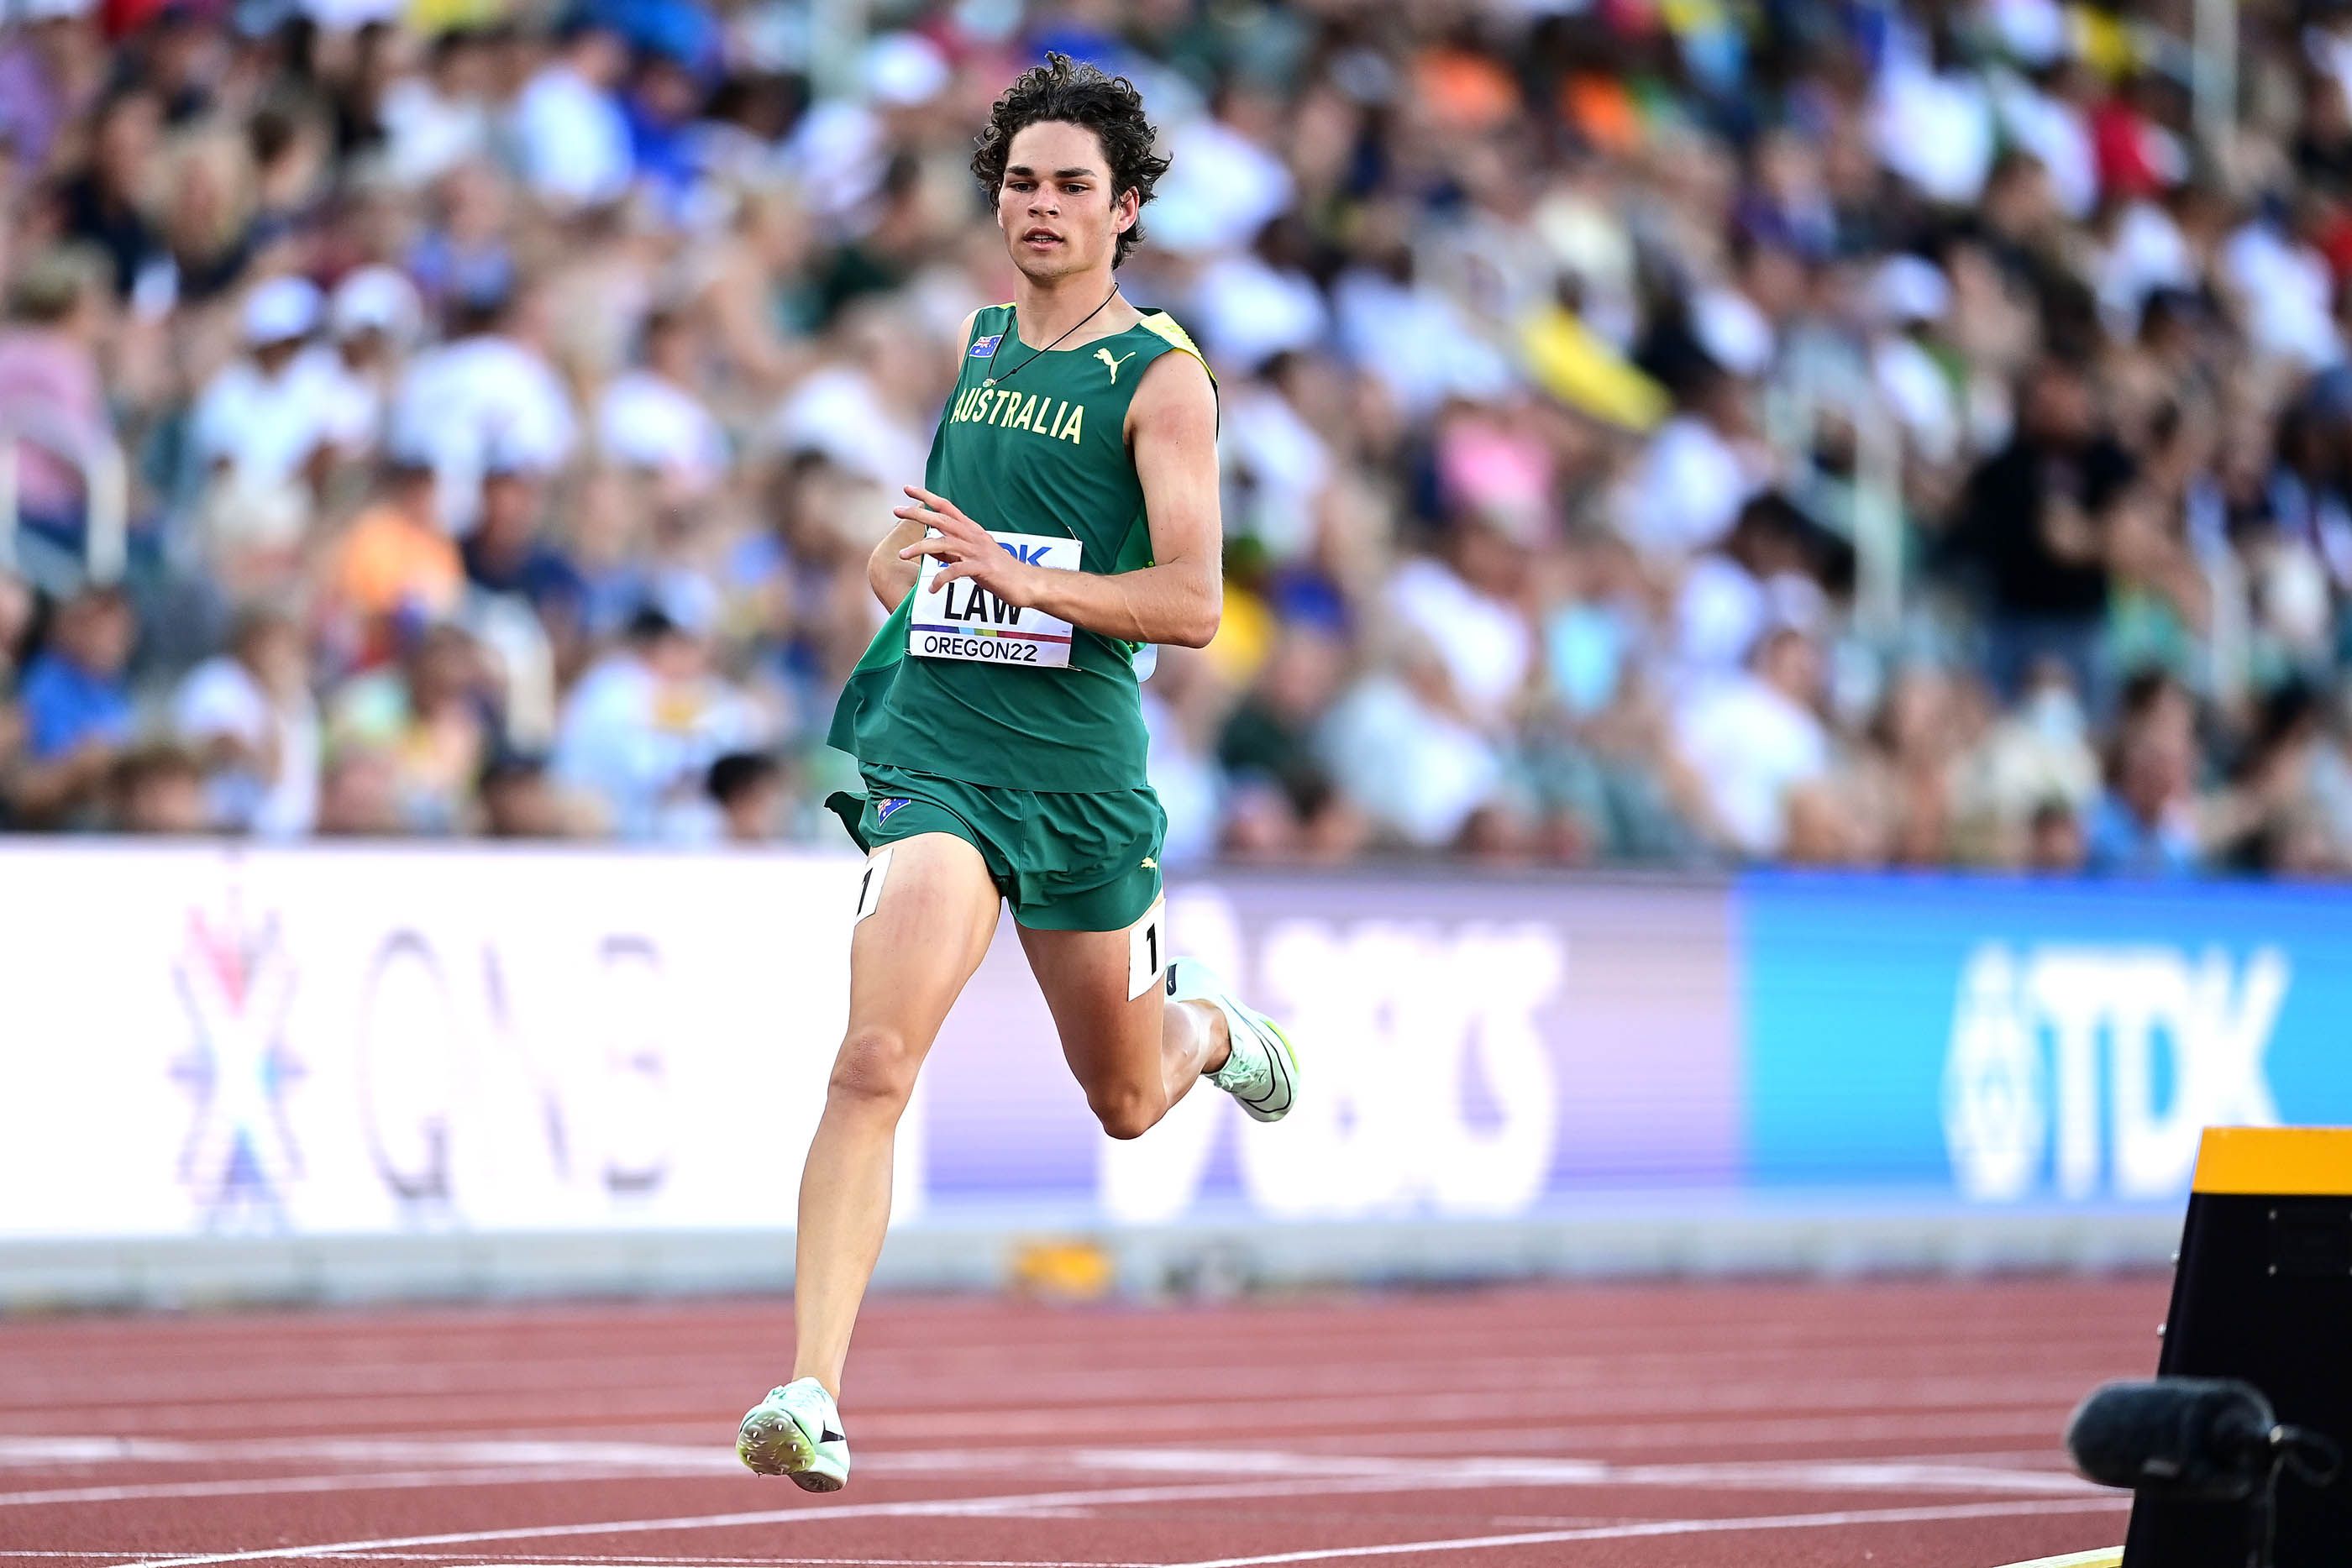 Calab Law races in the 200m semifinals at the World Athletics Championships Oregon22